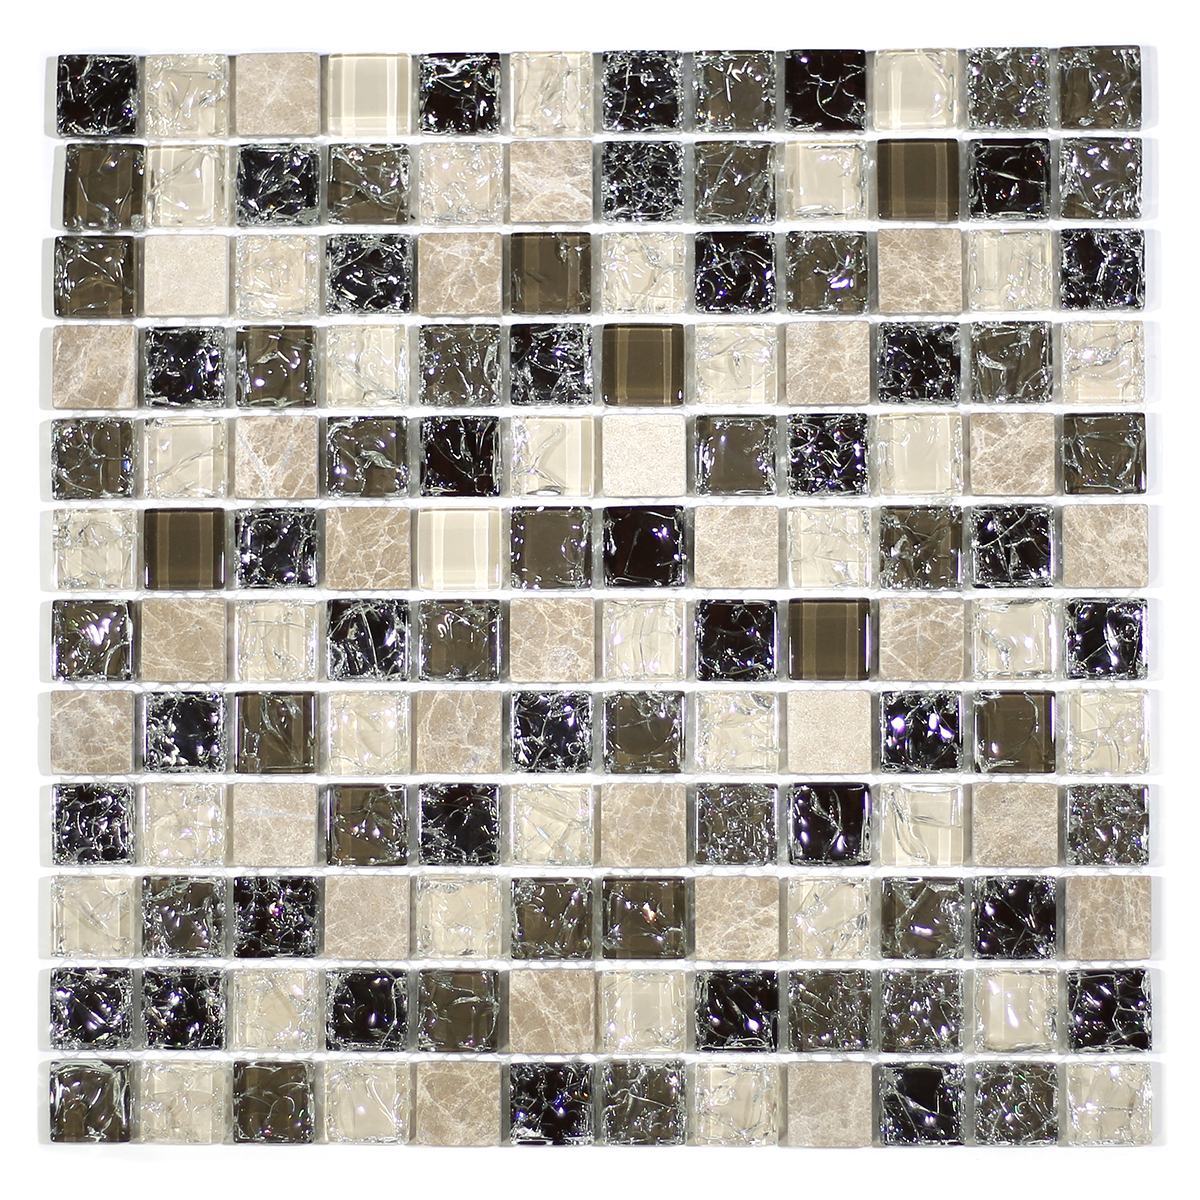 MA31-LS  1" SQUARE GLASS AND STONE CRACKLE MOSAIC